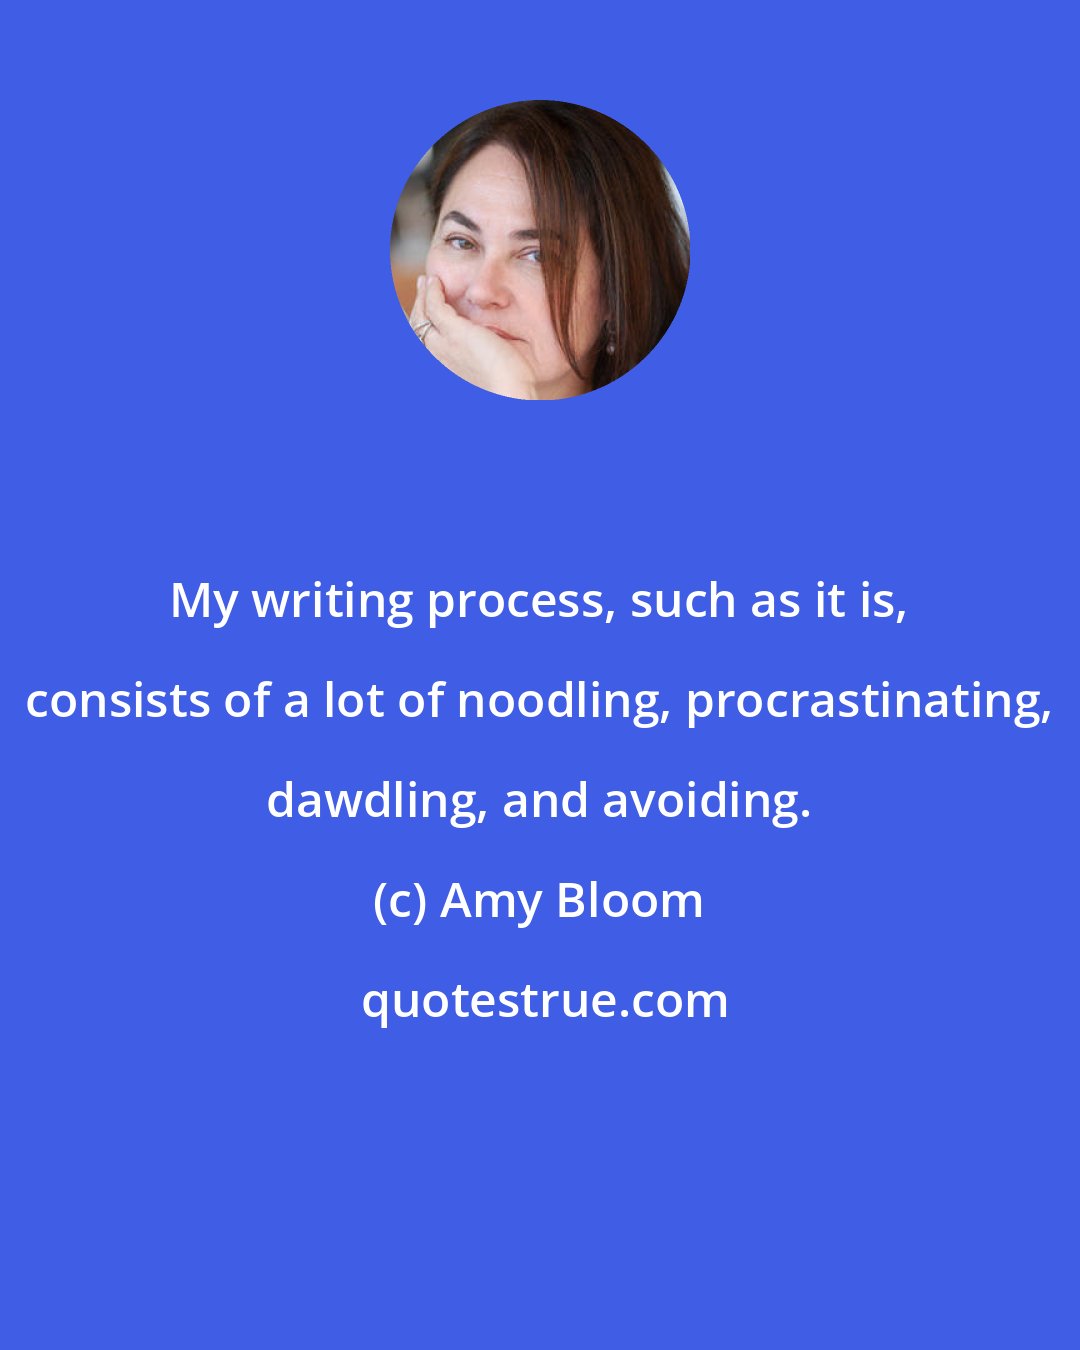 Amy Bloom: My writing process, such as it is, consists of a lot of noodling, procrastinating, dawdling, and avoiding.